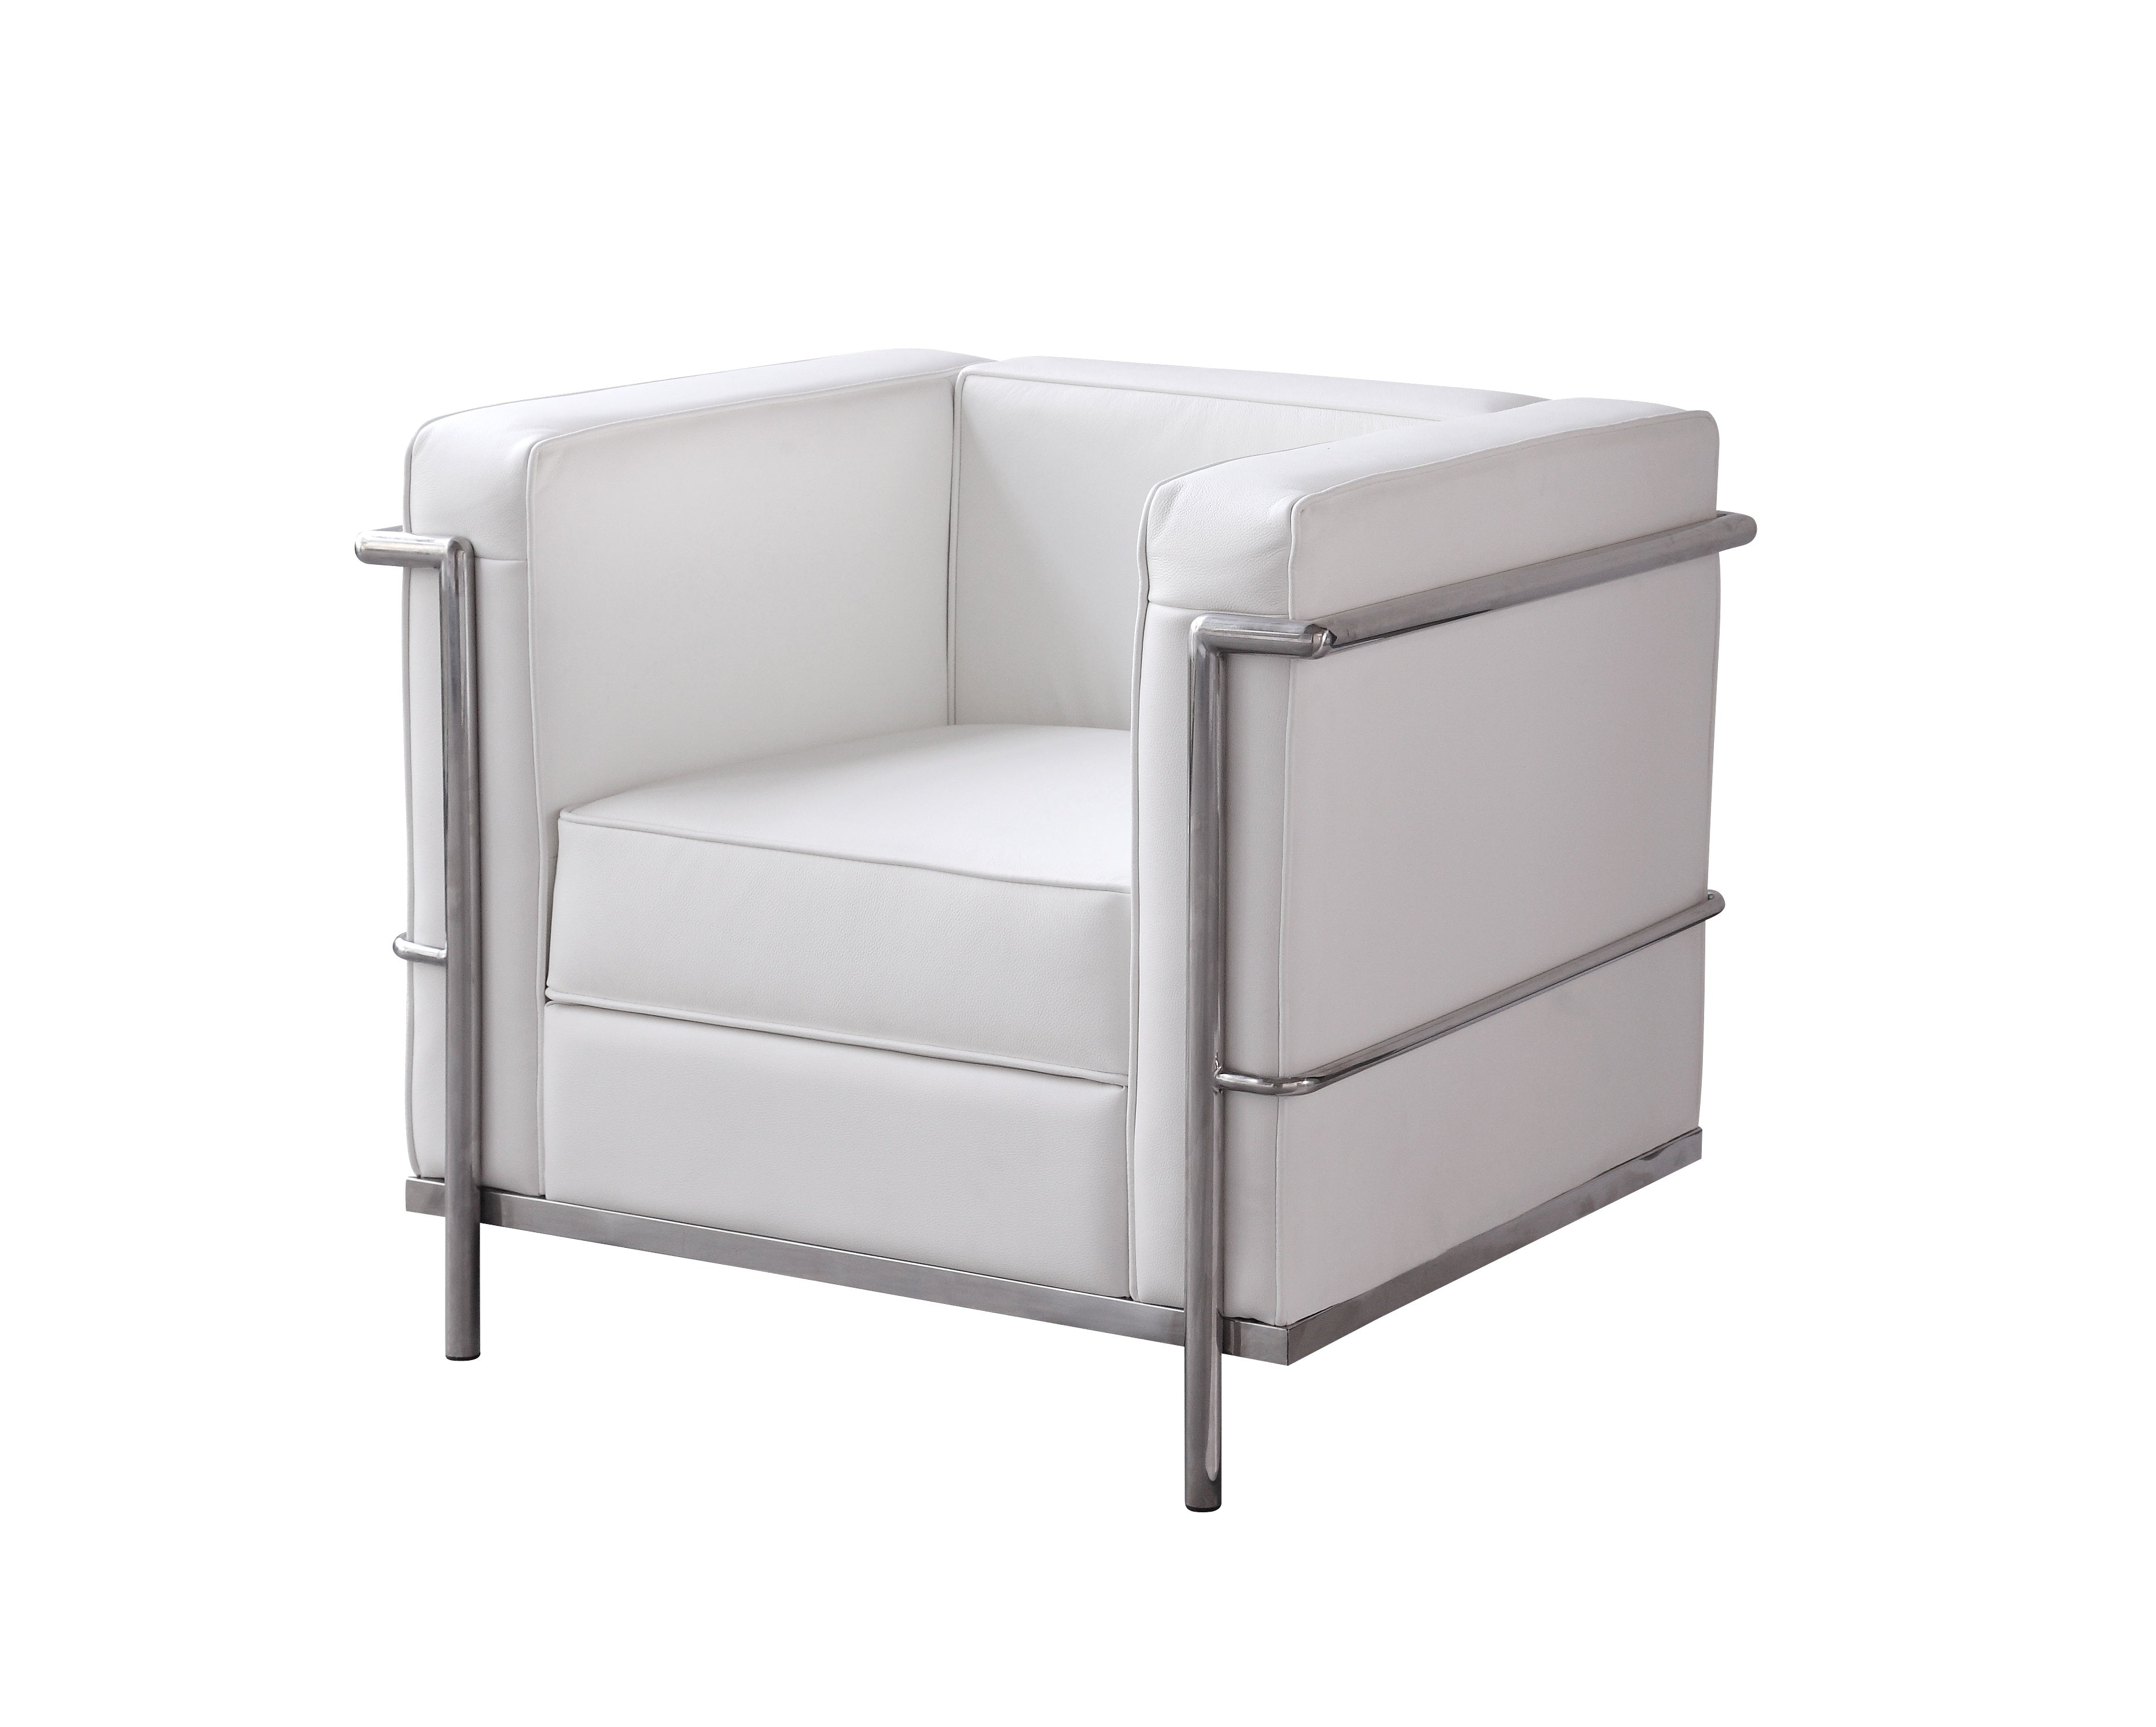 Cour Italian Leather Sofa Collection in White